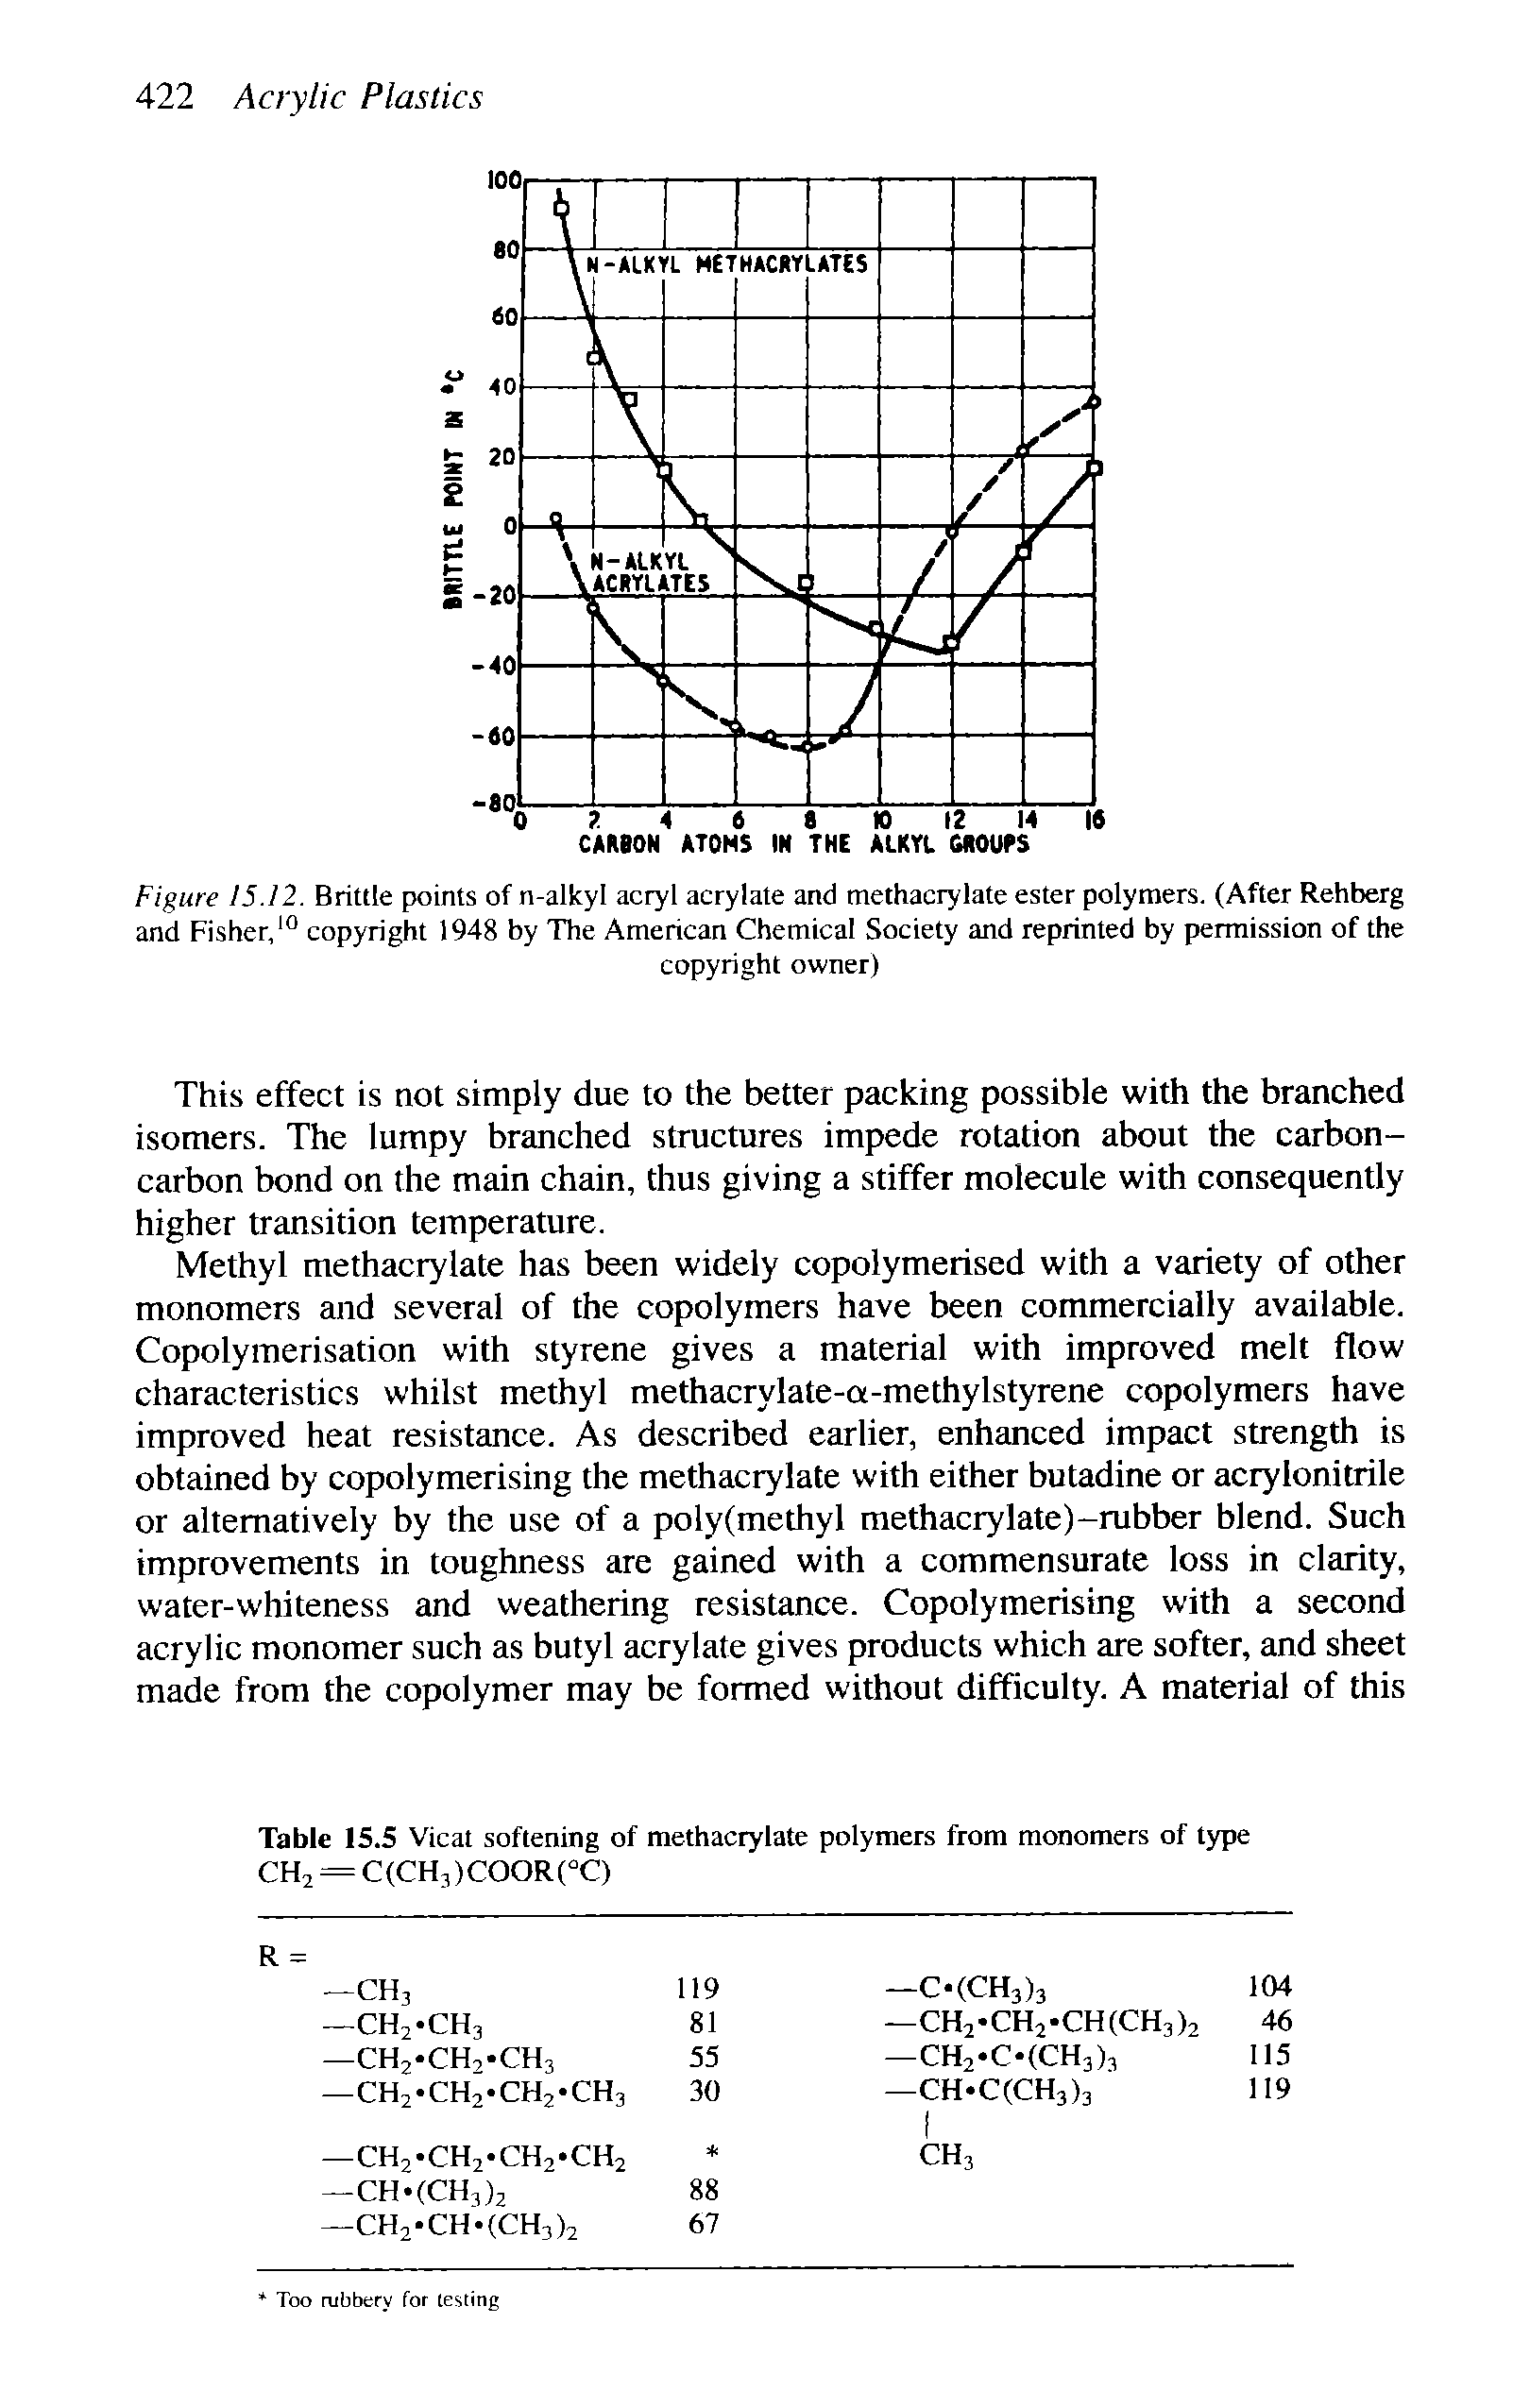 Figure 15.12. Brittle points of n-alkyl acryl acrylate and methacrylate ester polymers. (After Rehberg and Fisher, copyright 1948 by The American Chemical Society and reprinted by permission of the...